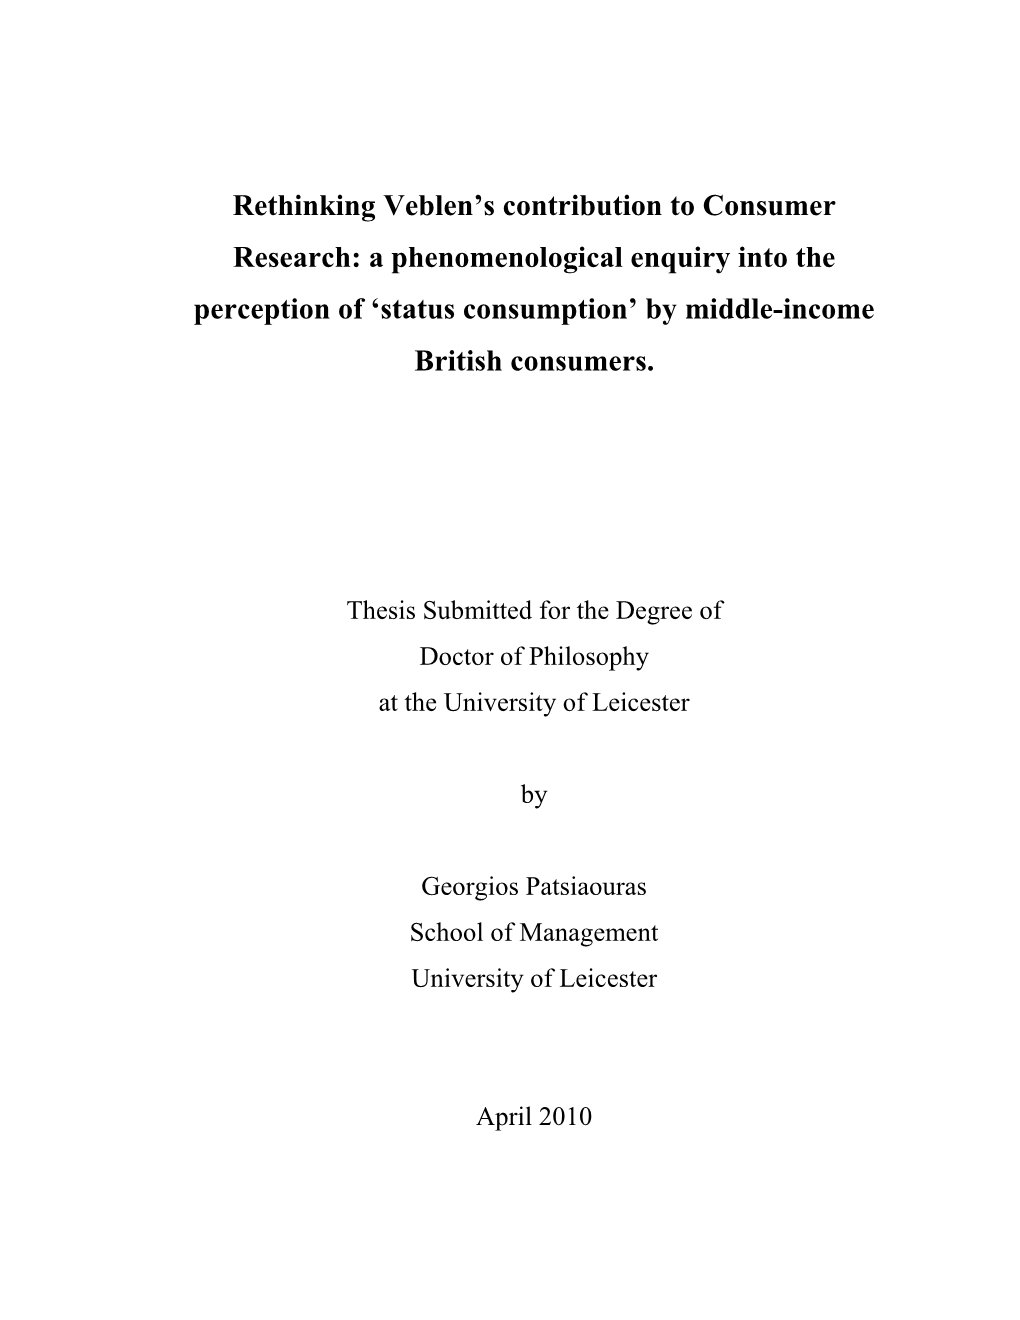 Rethinking Veblen's Contribution to Consumer Research: A